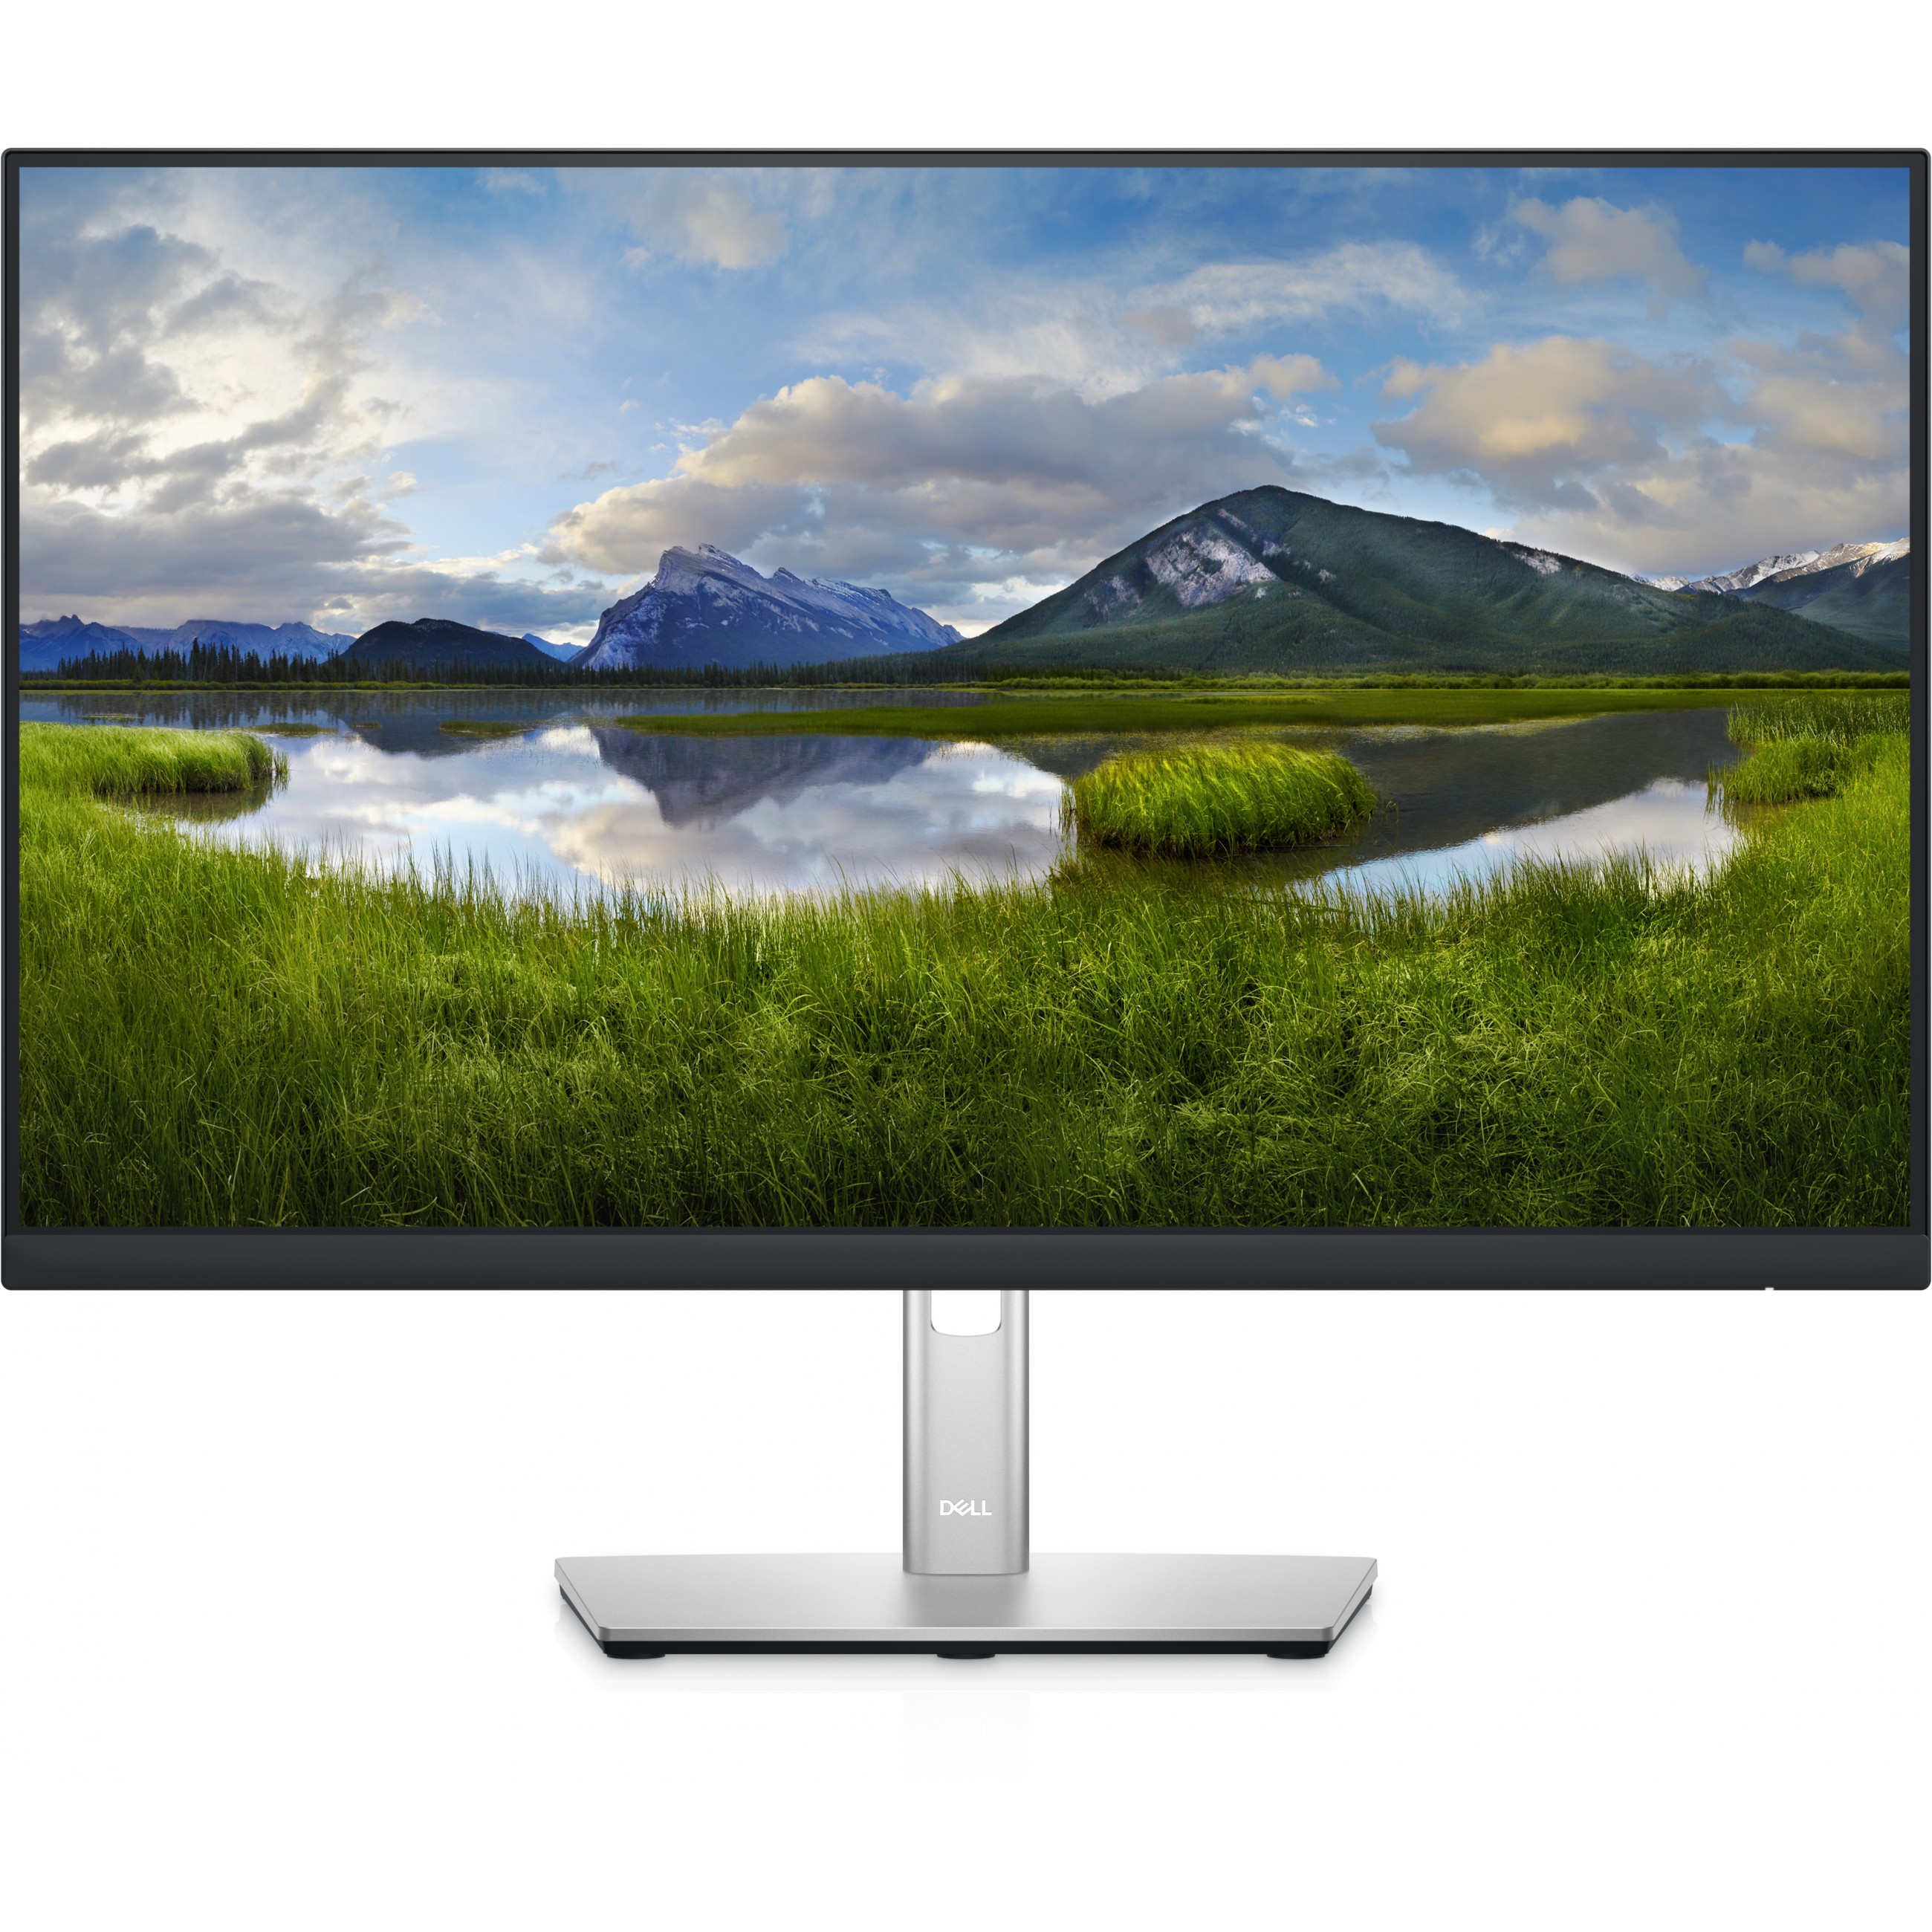 DELL P Series P2422HE LED display - DELL-P2422HE